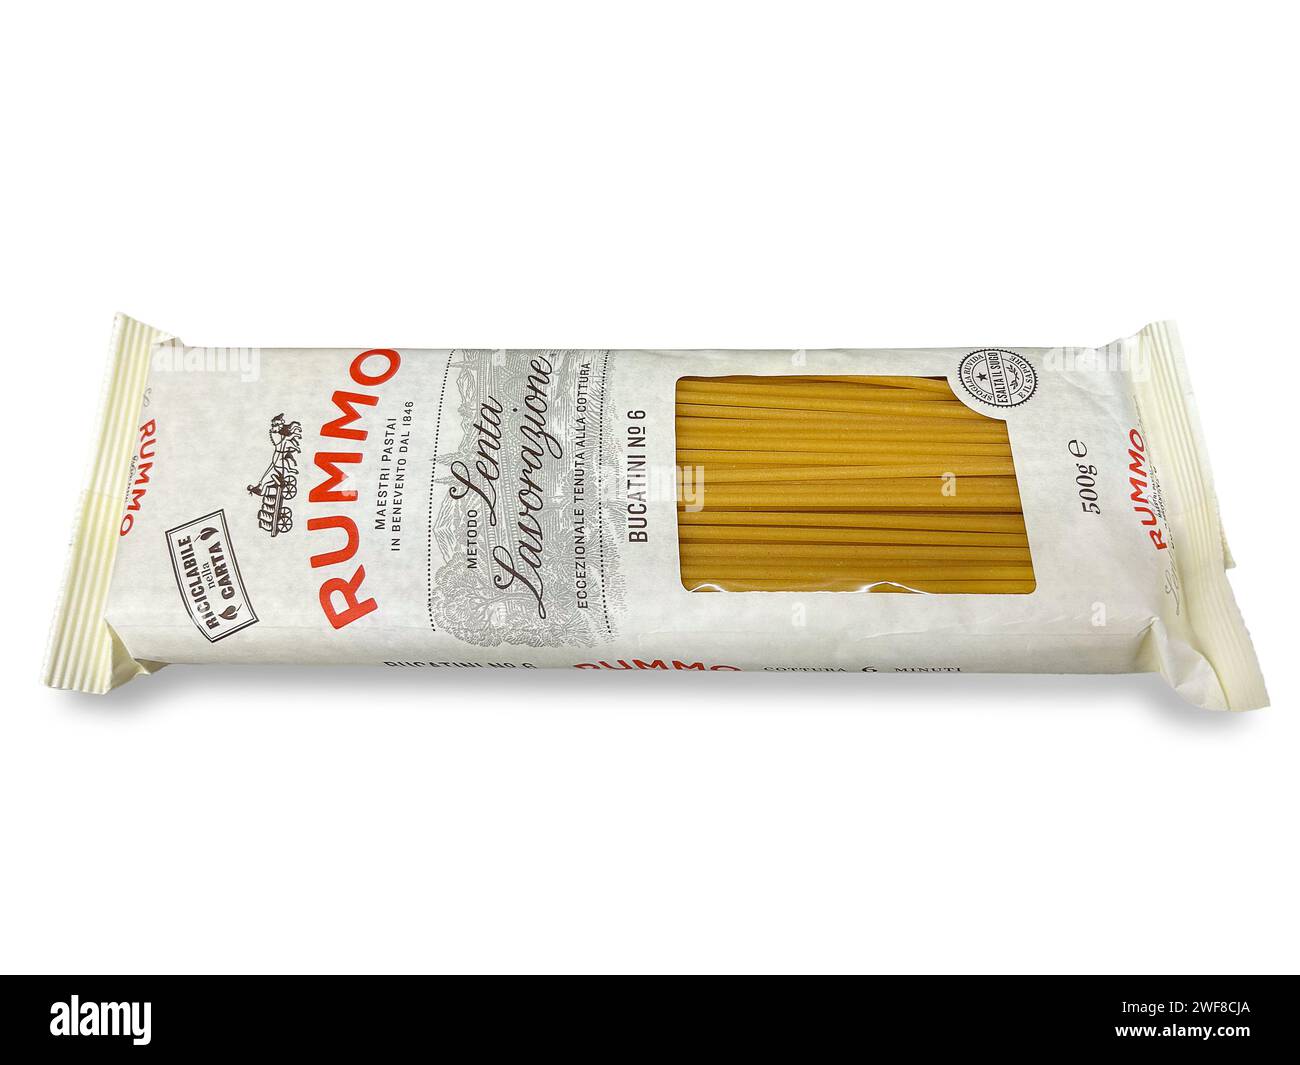 Pasta rummo hi-res stock photography and images - Alamy